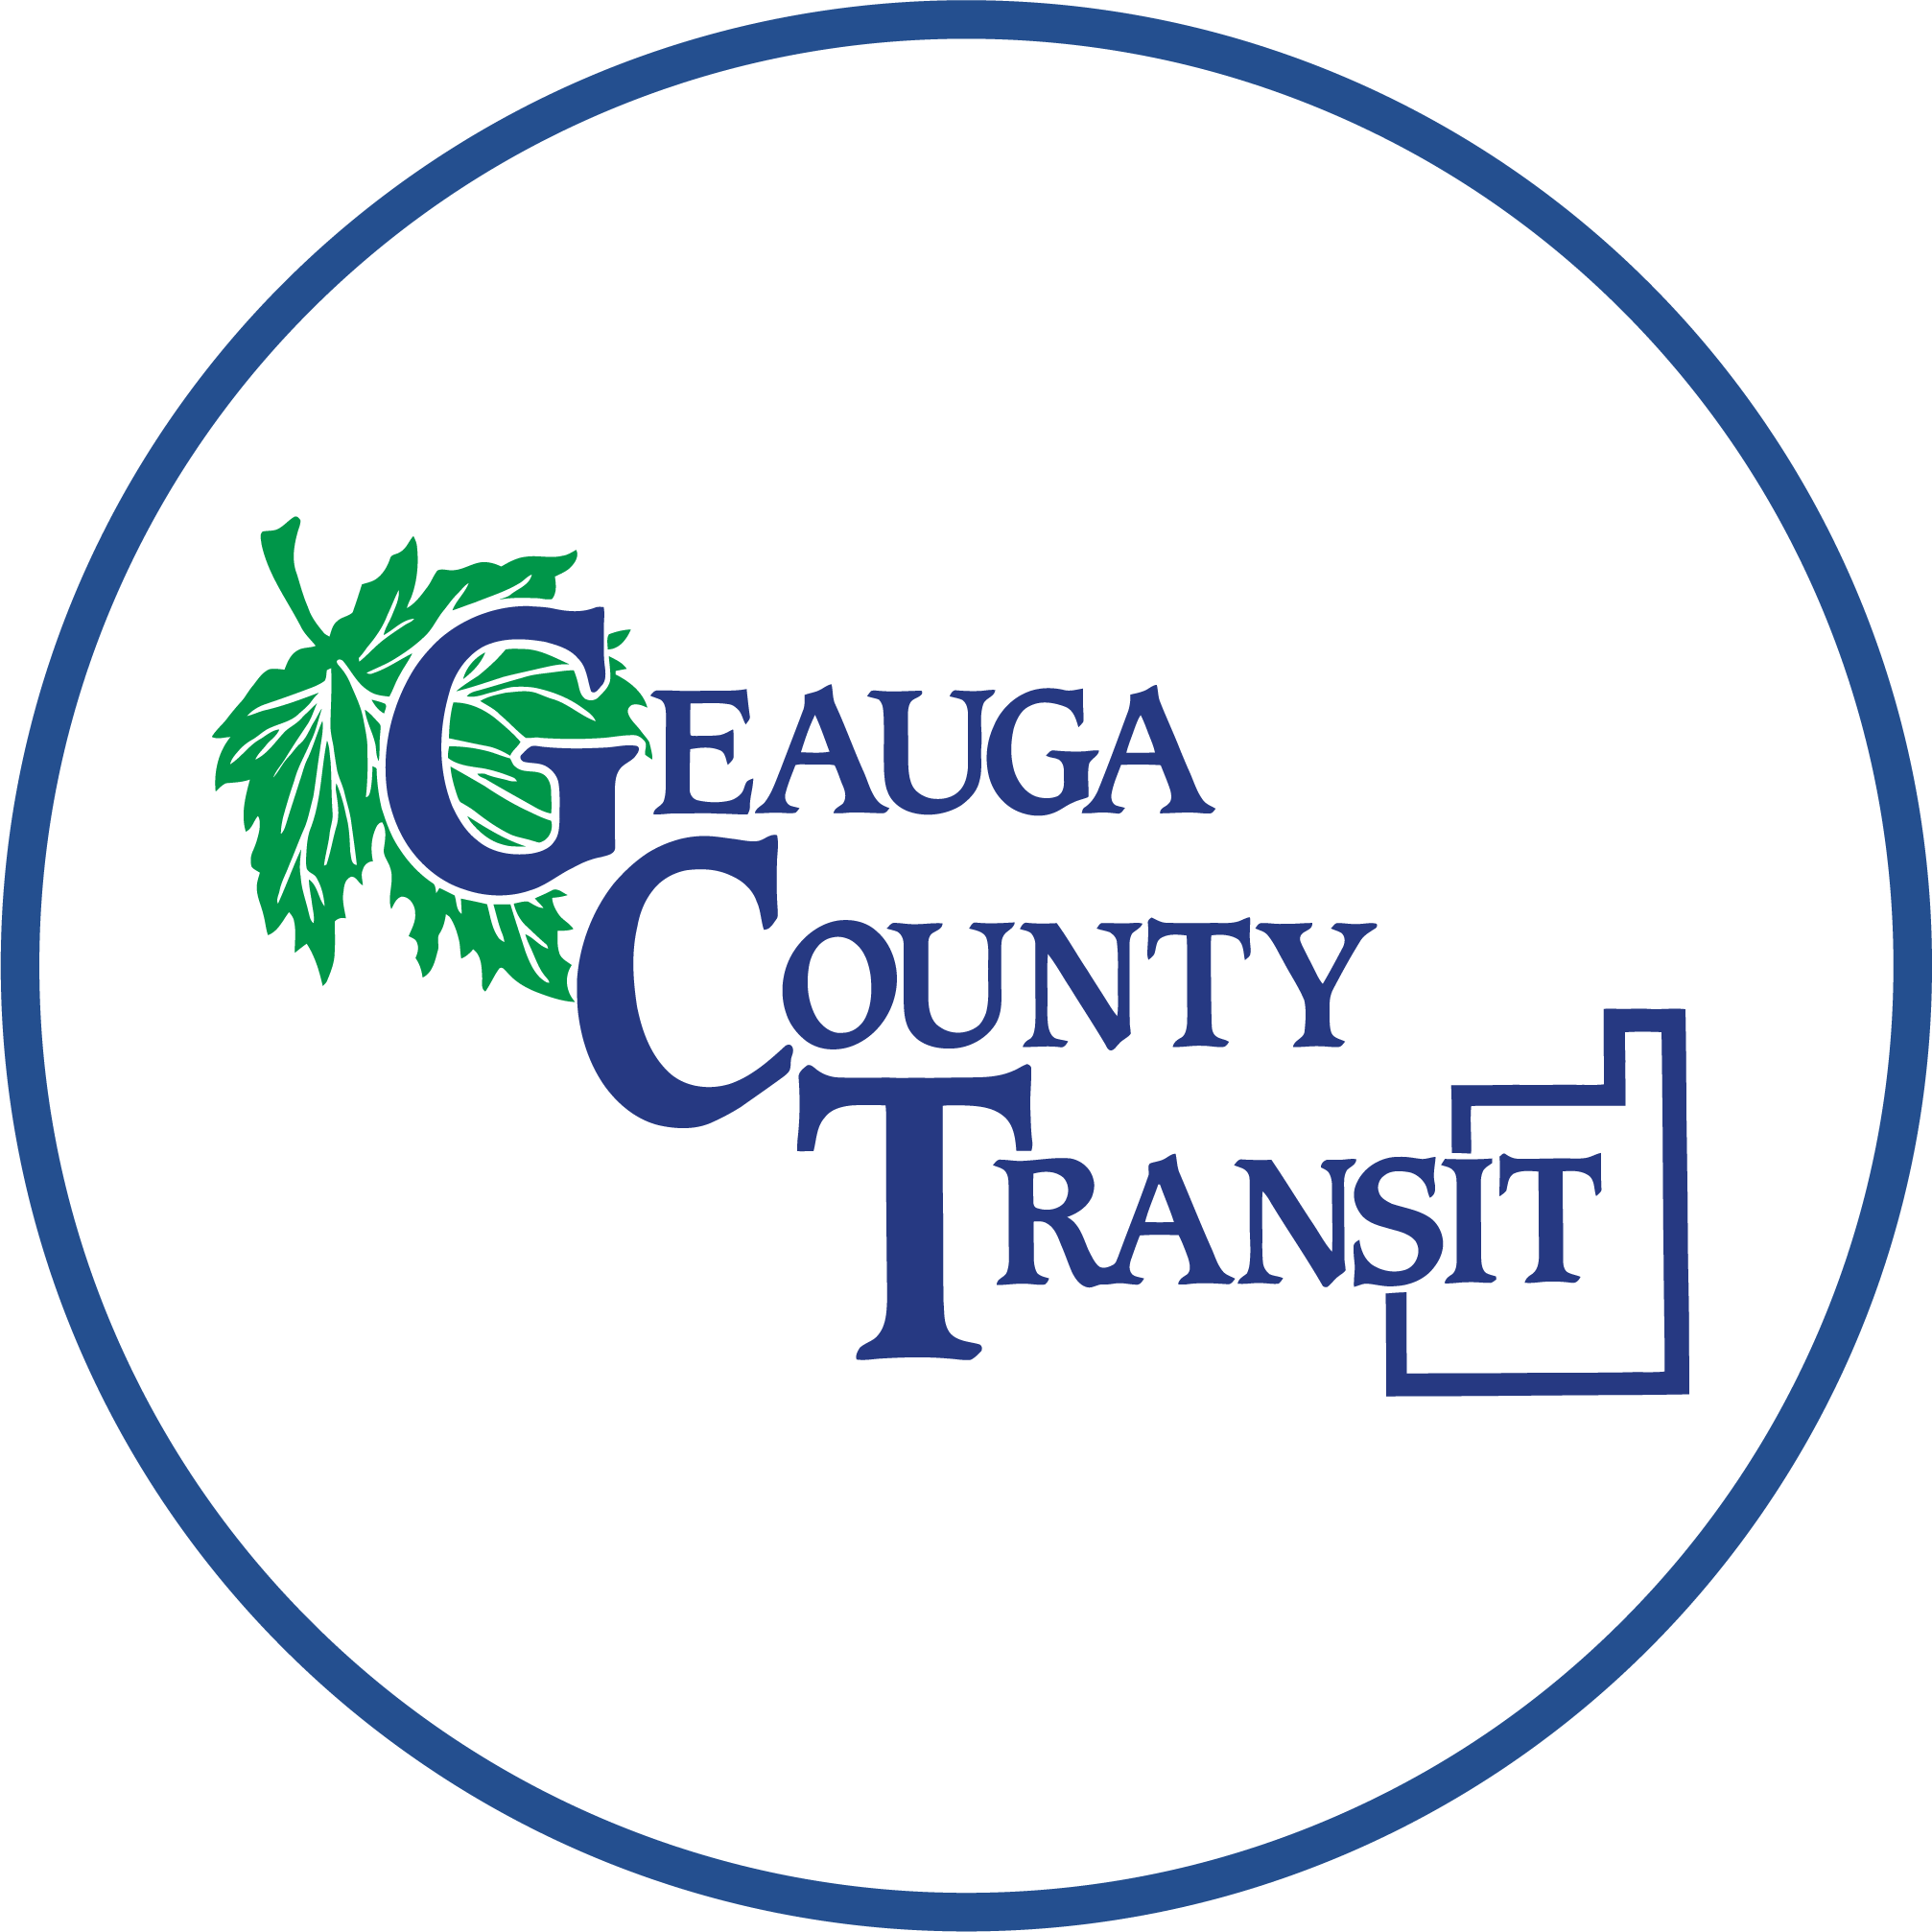 Geauga County Transit logo Geauga County Clerk of Courts